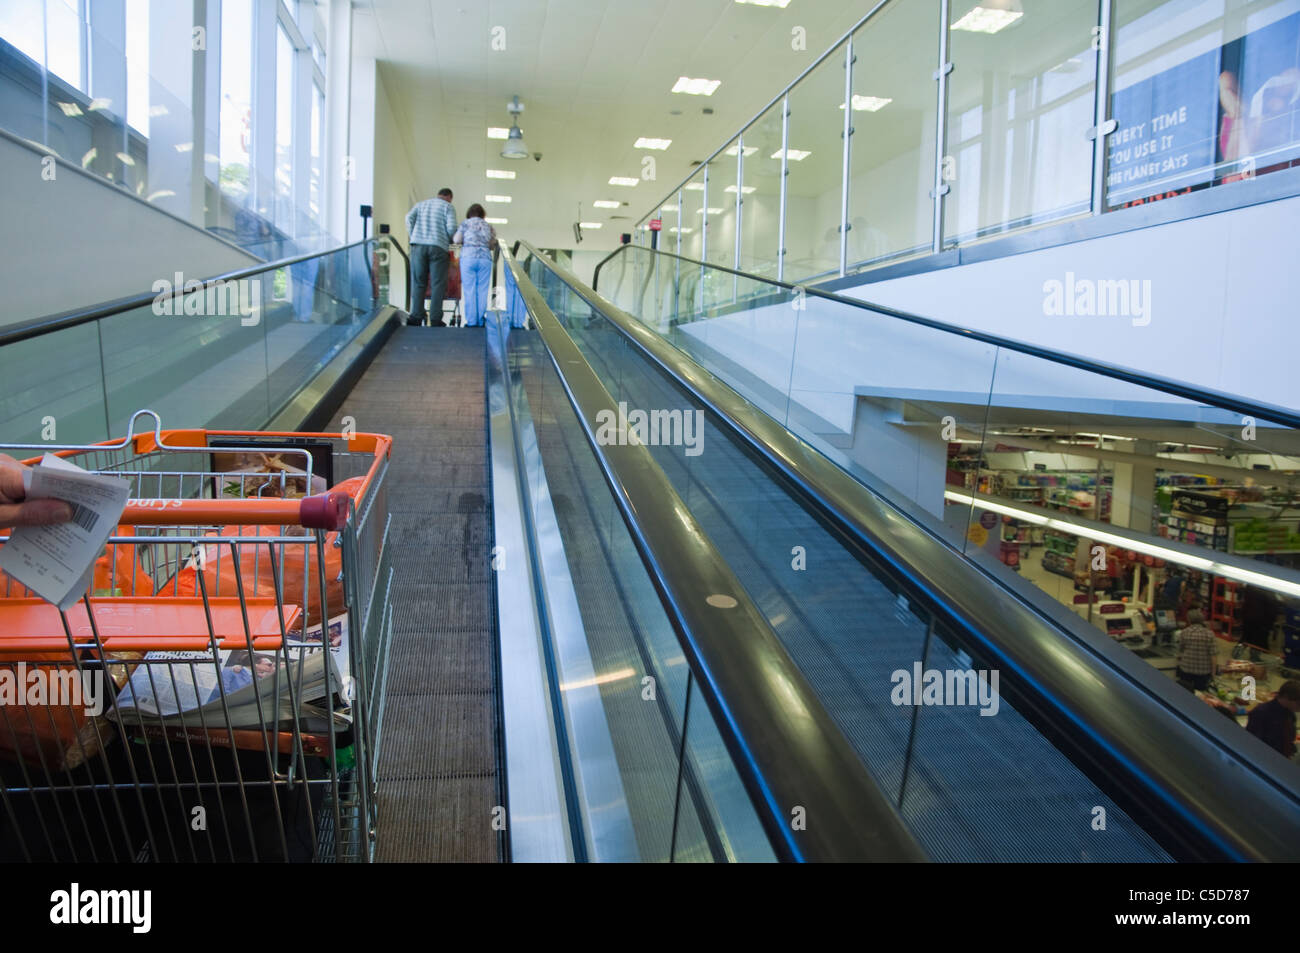 A Sainsbury's shopping trolley going up a travelator at a Sainsbury store. The receipt for food purchased is also in view. UK. Stock Photo